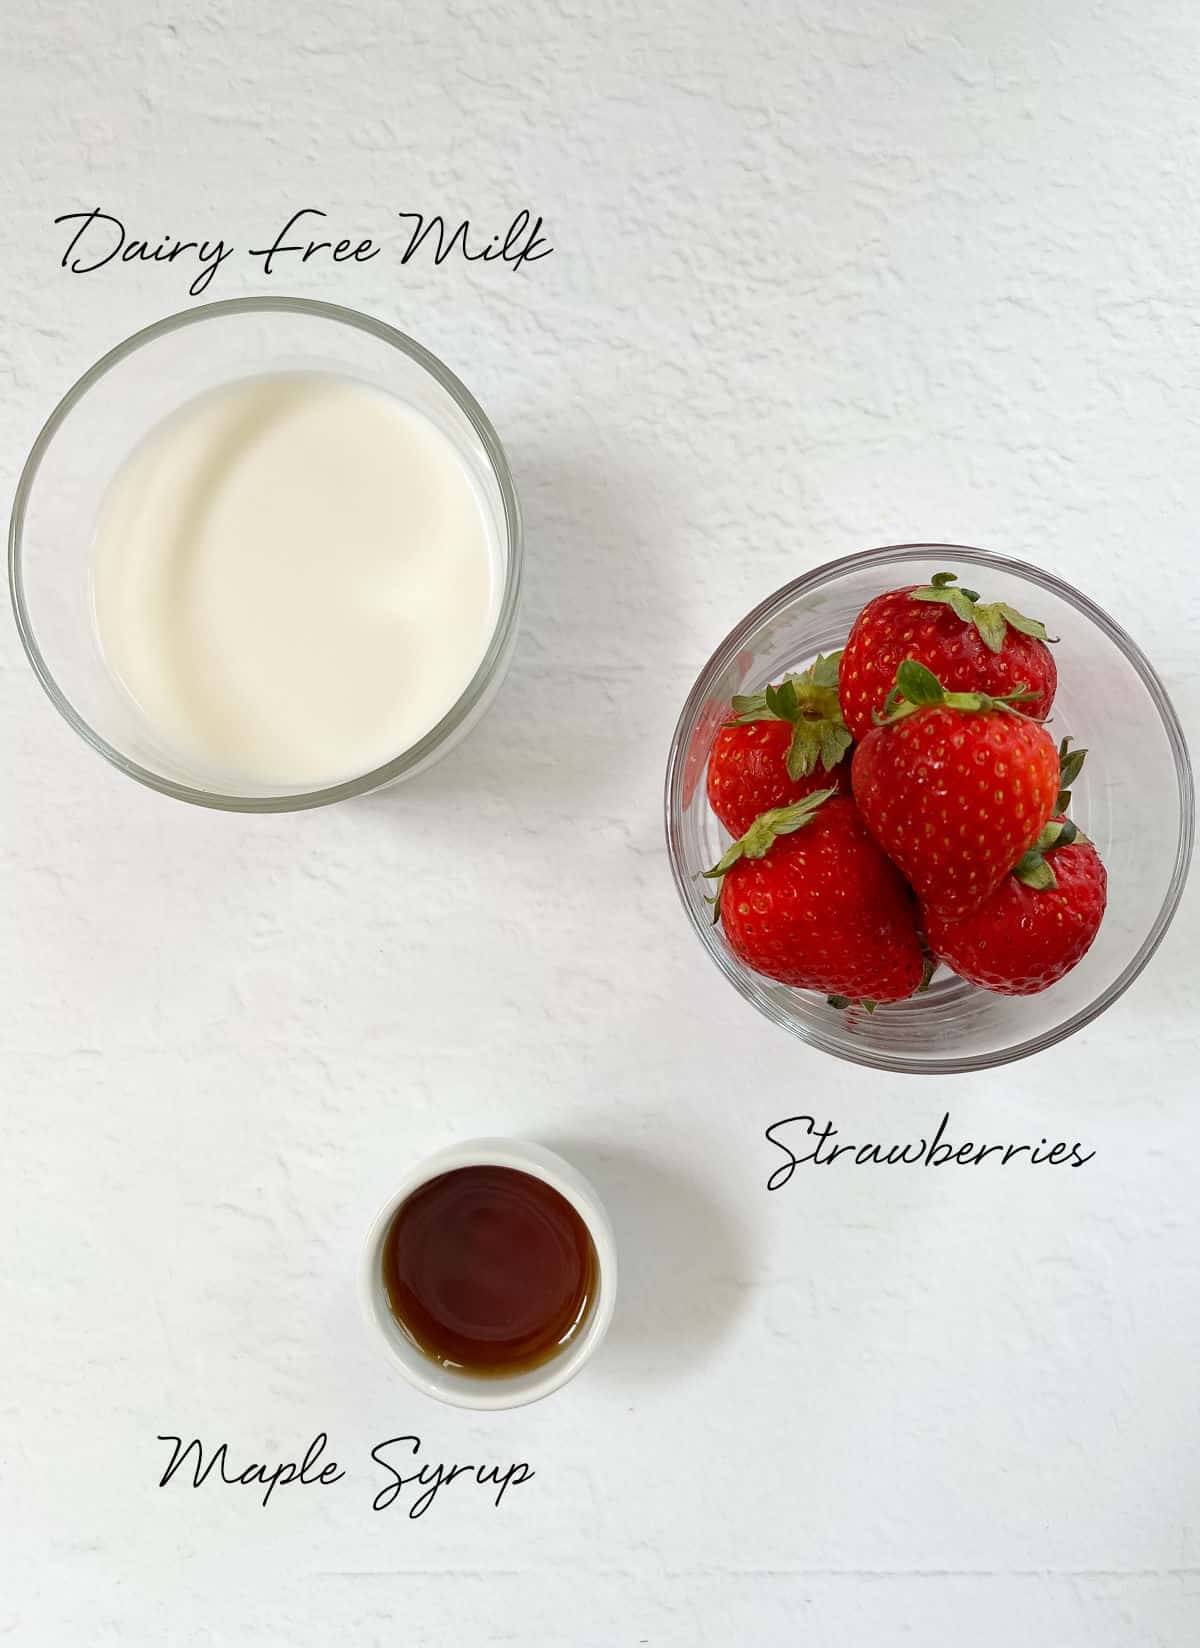 strawberries, milk and maple syrup in white bowls